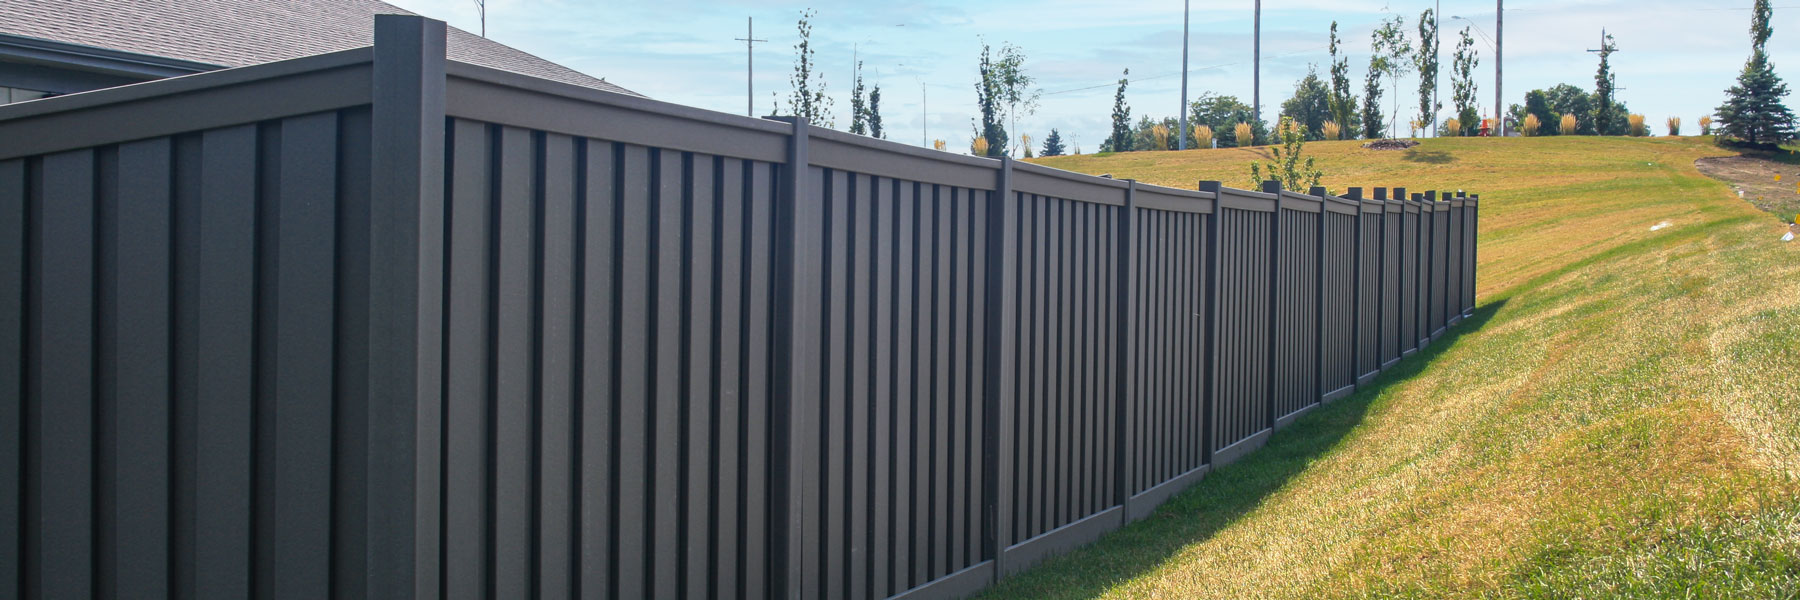 Fargo fence company commercial fence contractors North Dakota board on board shadow box picket alternating staggered wood vinyl tan sandstone white sandstone khaki cracking chipping splitting UVB residential backyard perimeter security visibility solid